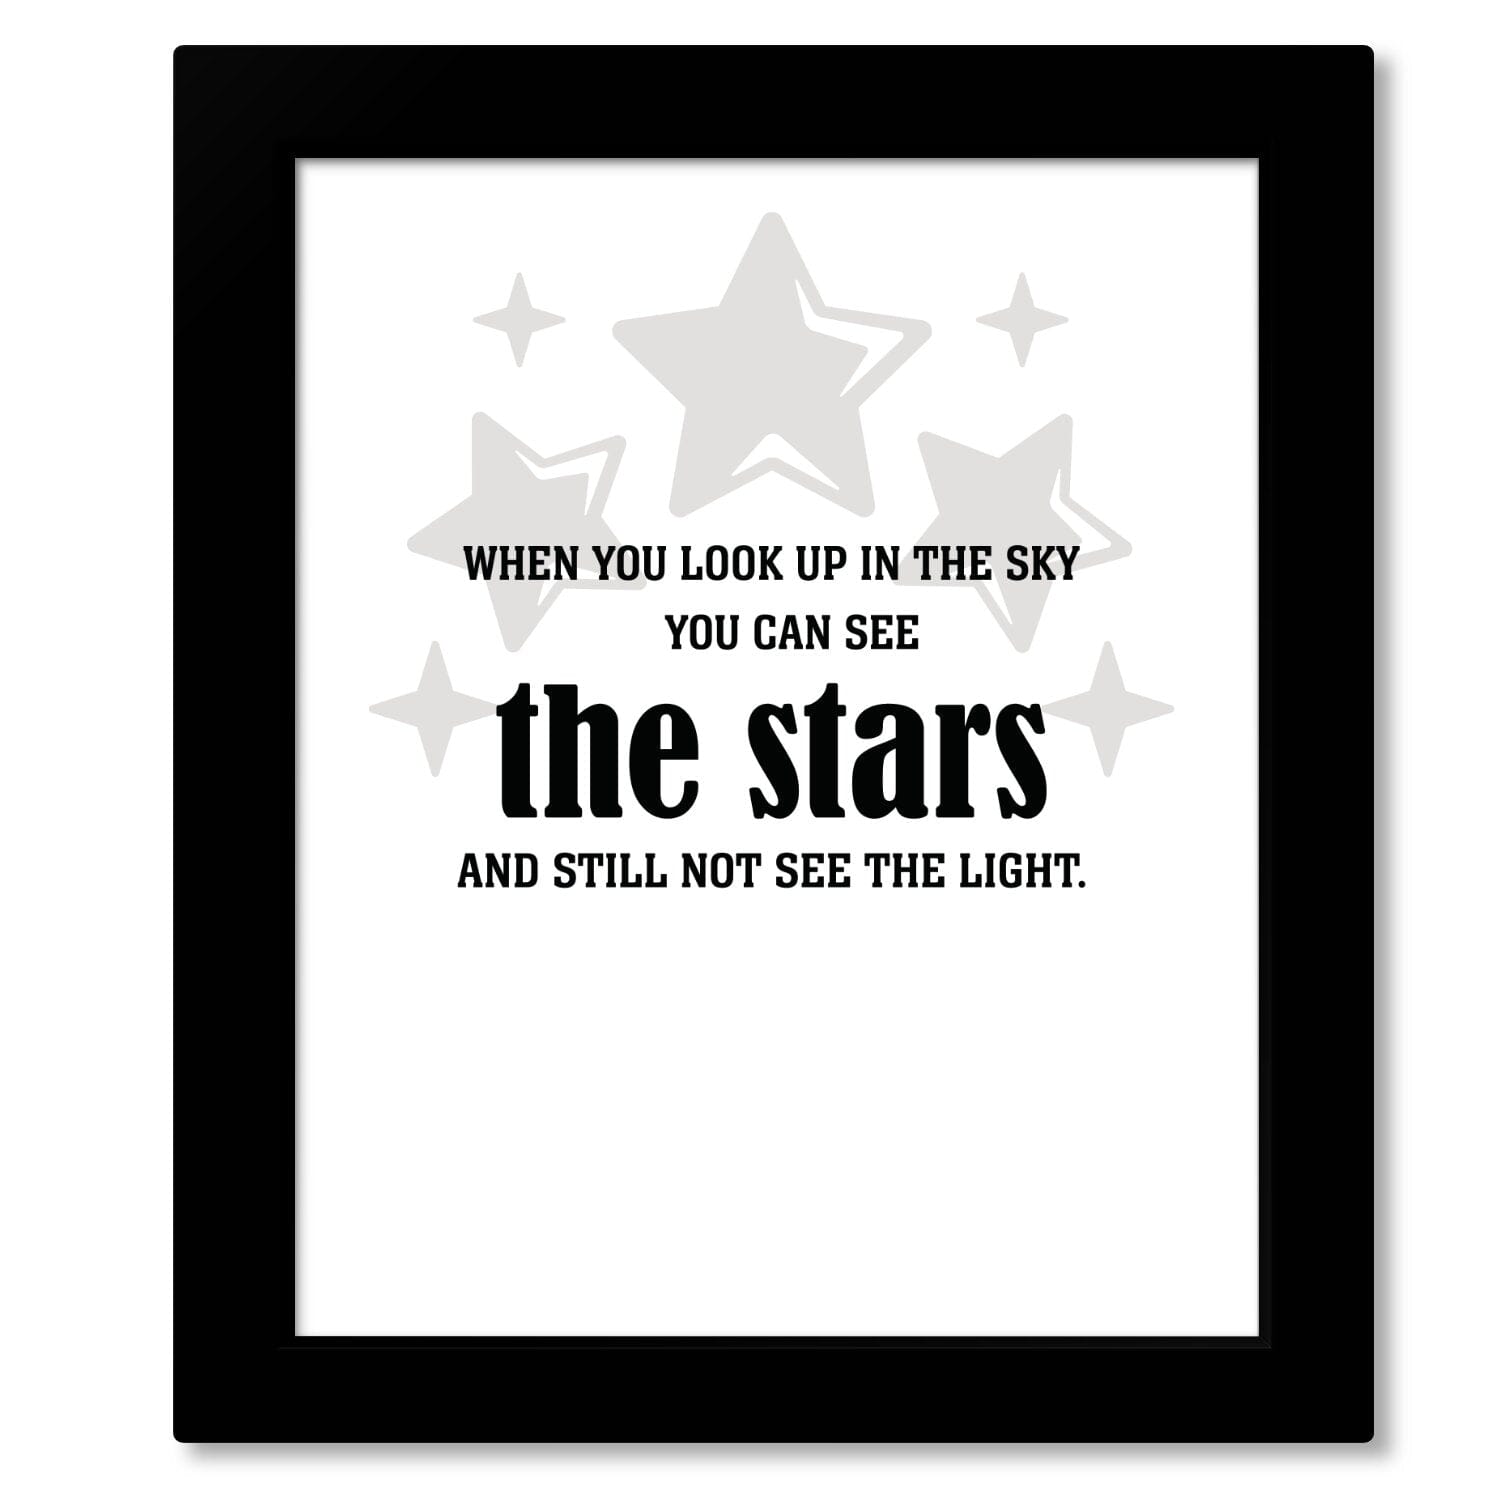 See the Stars and Still not see the Light - Wise and Witty Print Wise and Wiseass Quotes Song Lyrics Art 8x10 Framed Print 